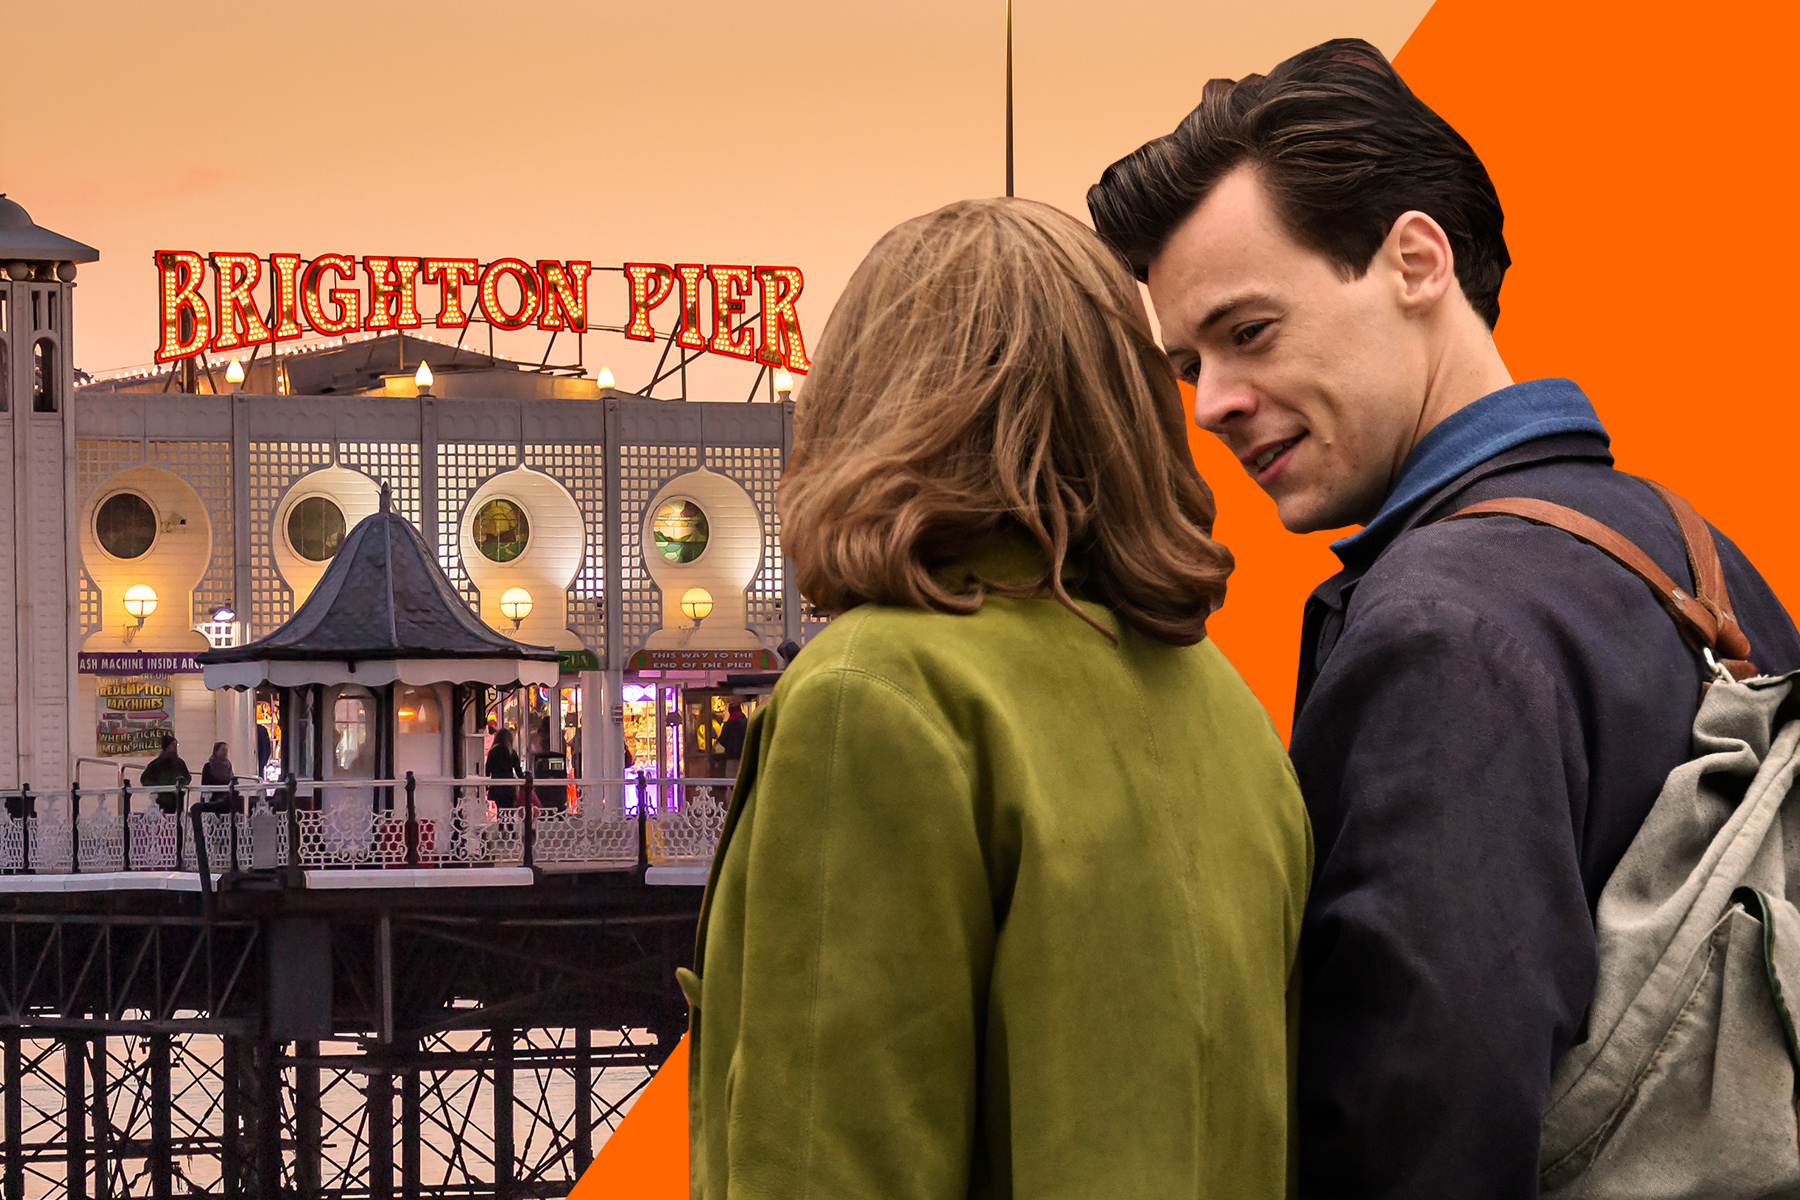 A collage of Harry Styles and Emma Corrin in front of a photograph of Brighton Pier against an orange background